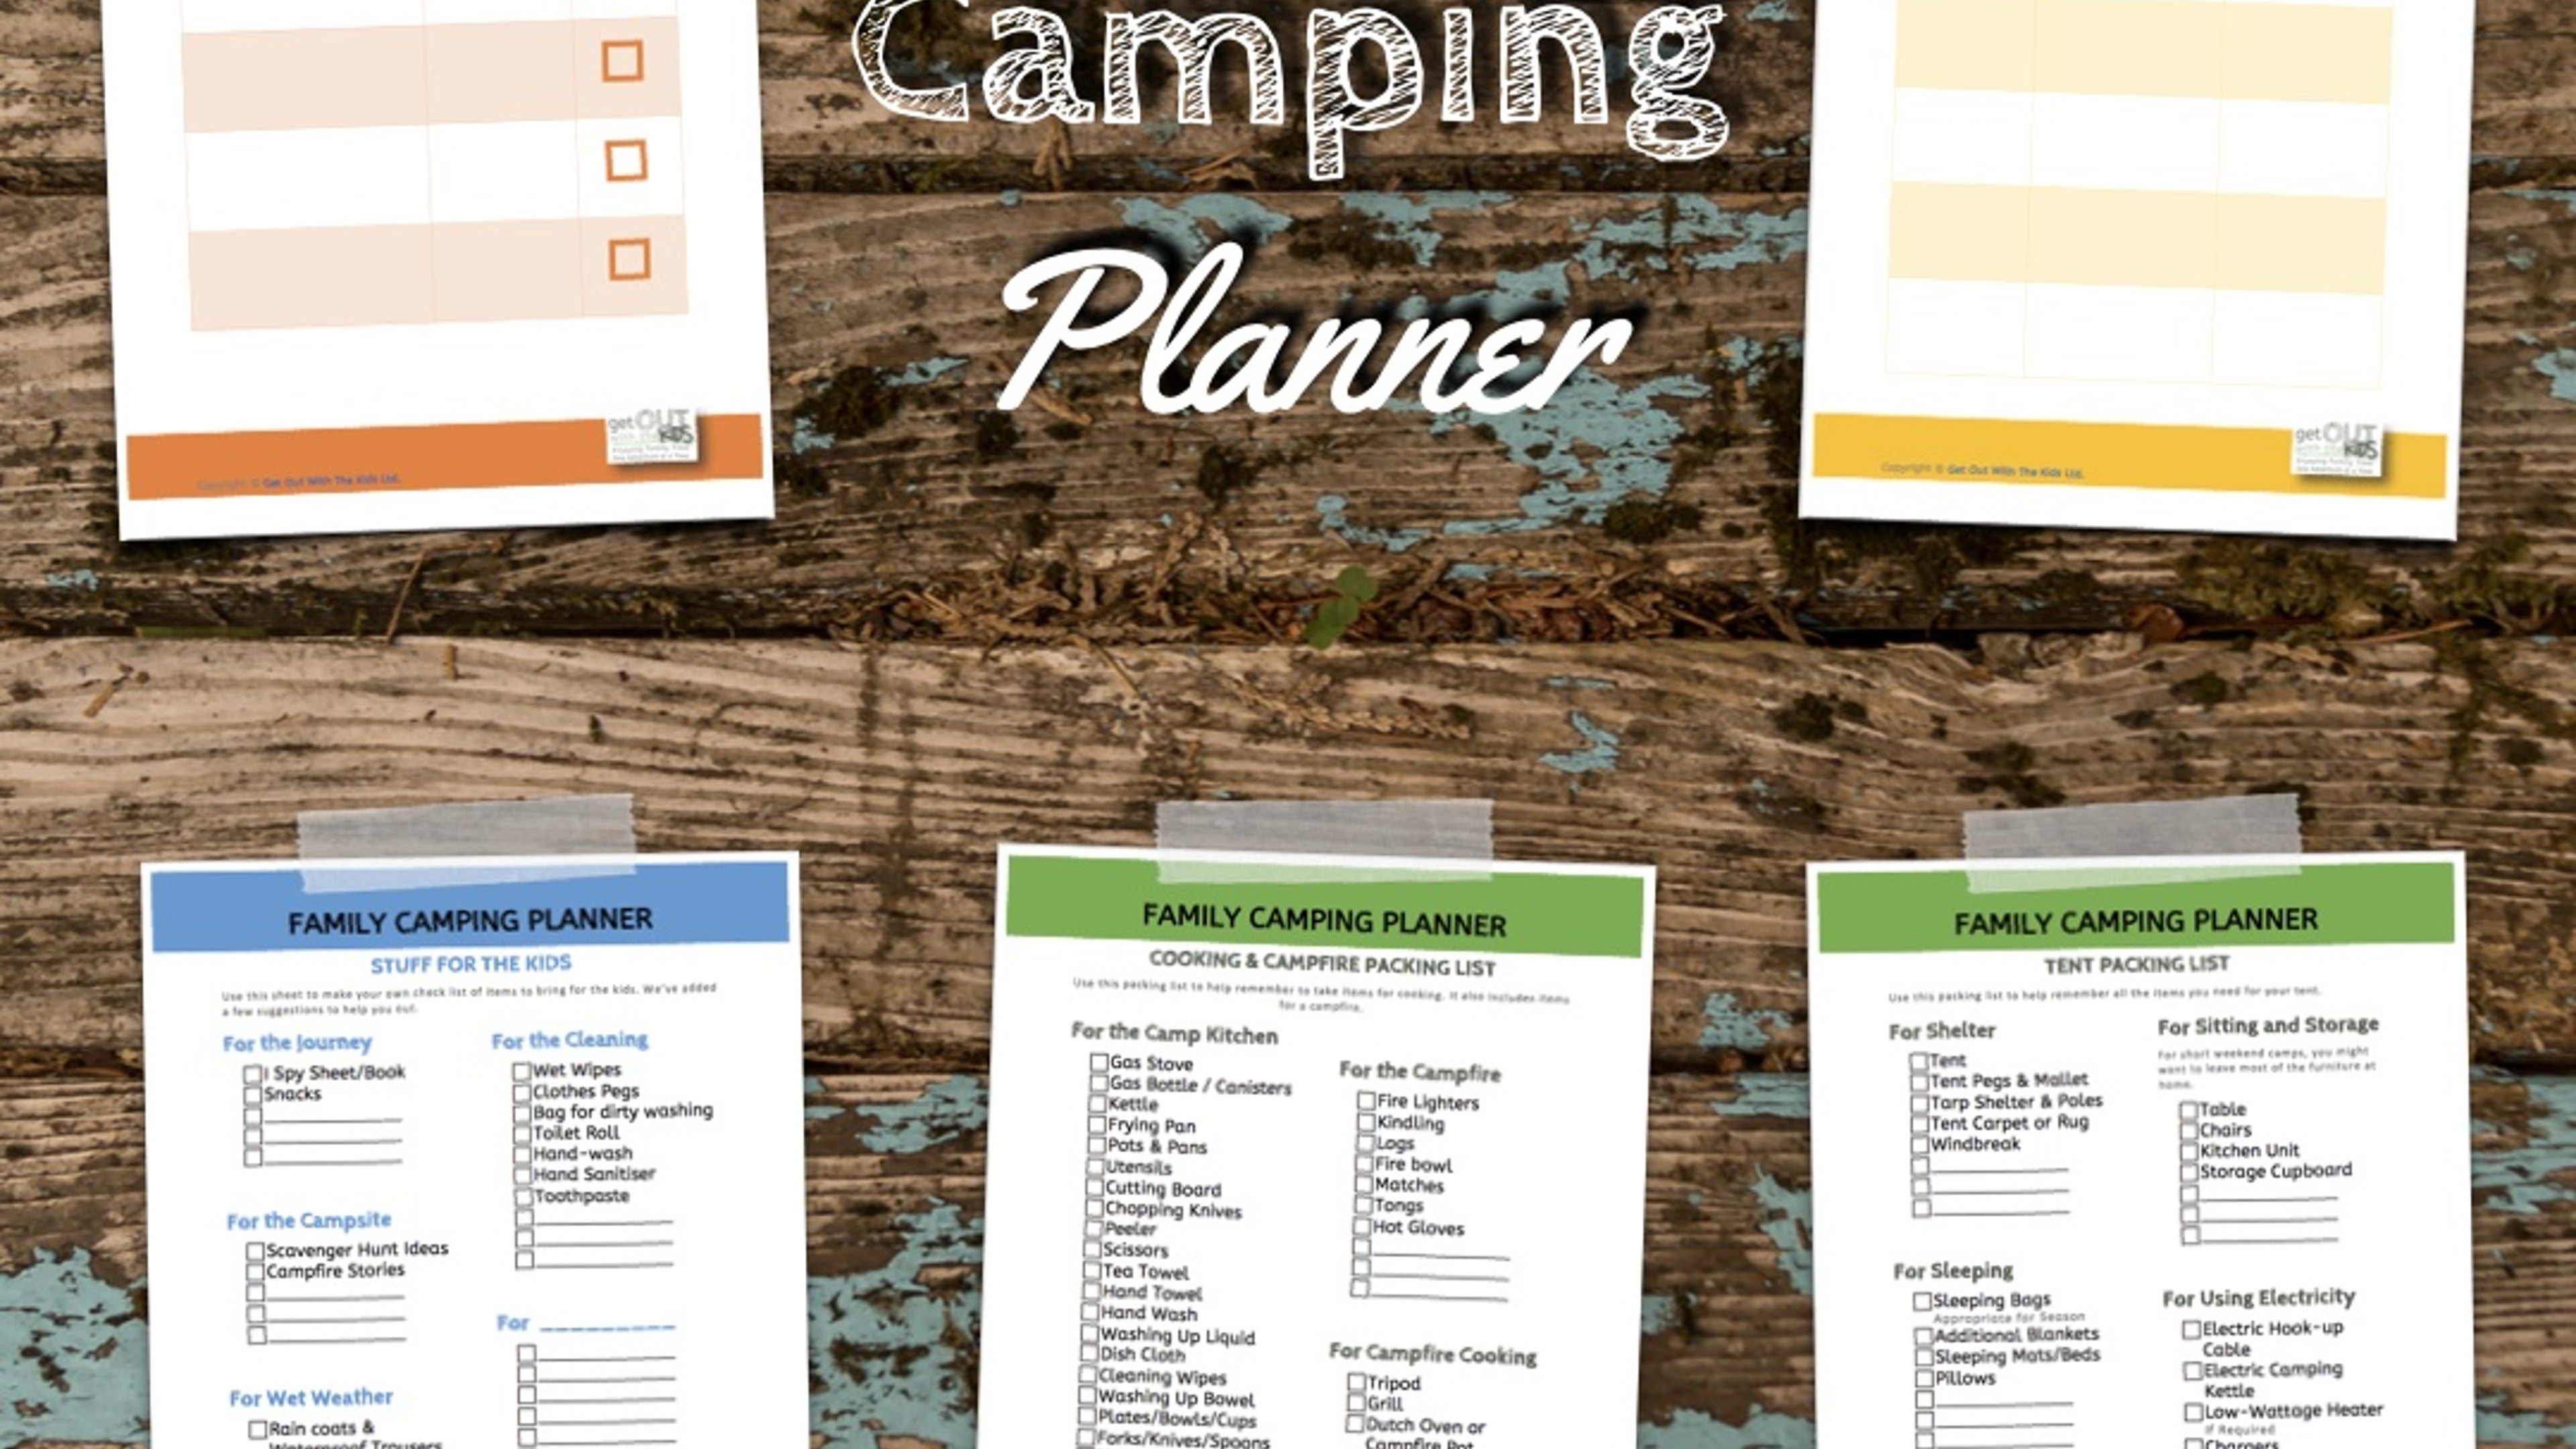 The Family Camping Planner